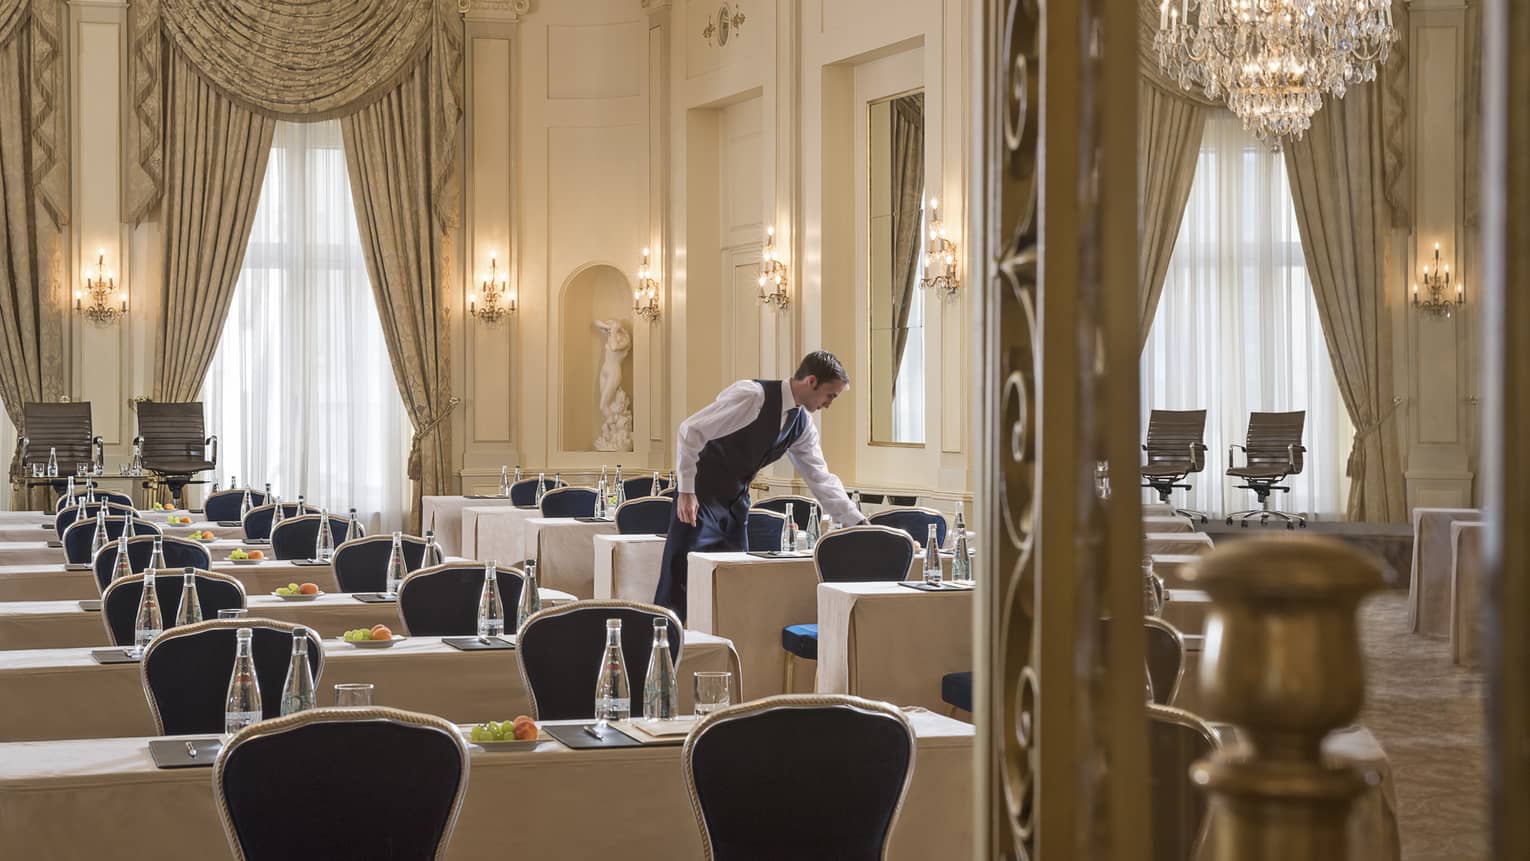 Hotel staff sets rows of conference tables in elegant Salon des Nations